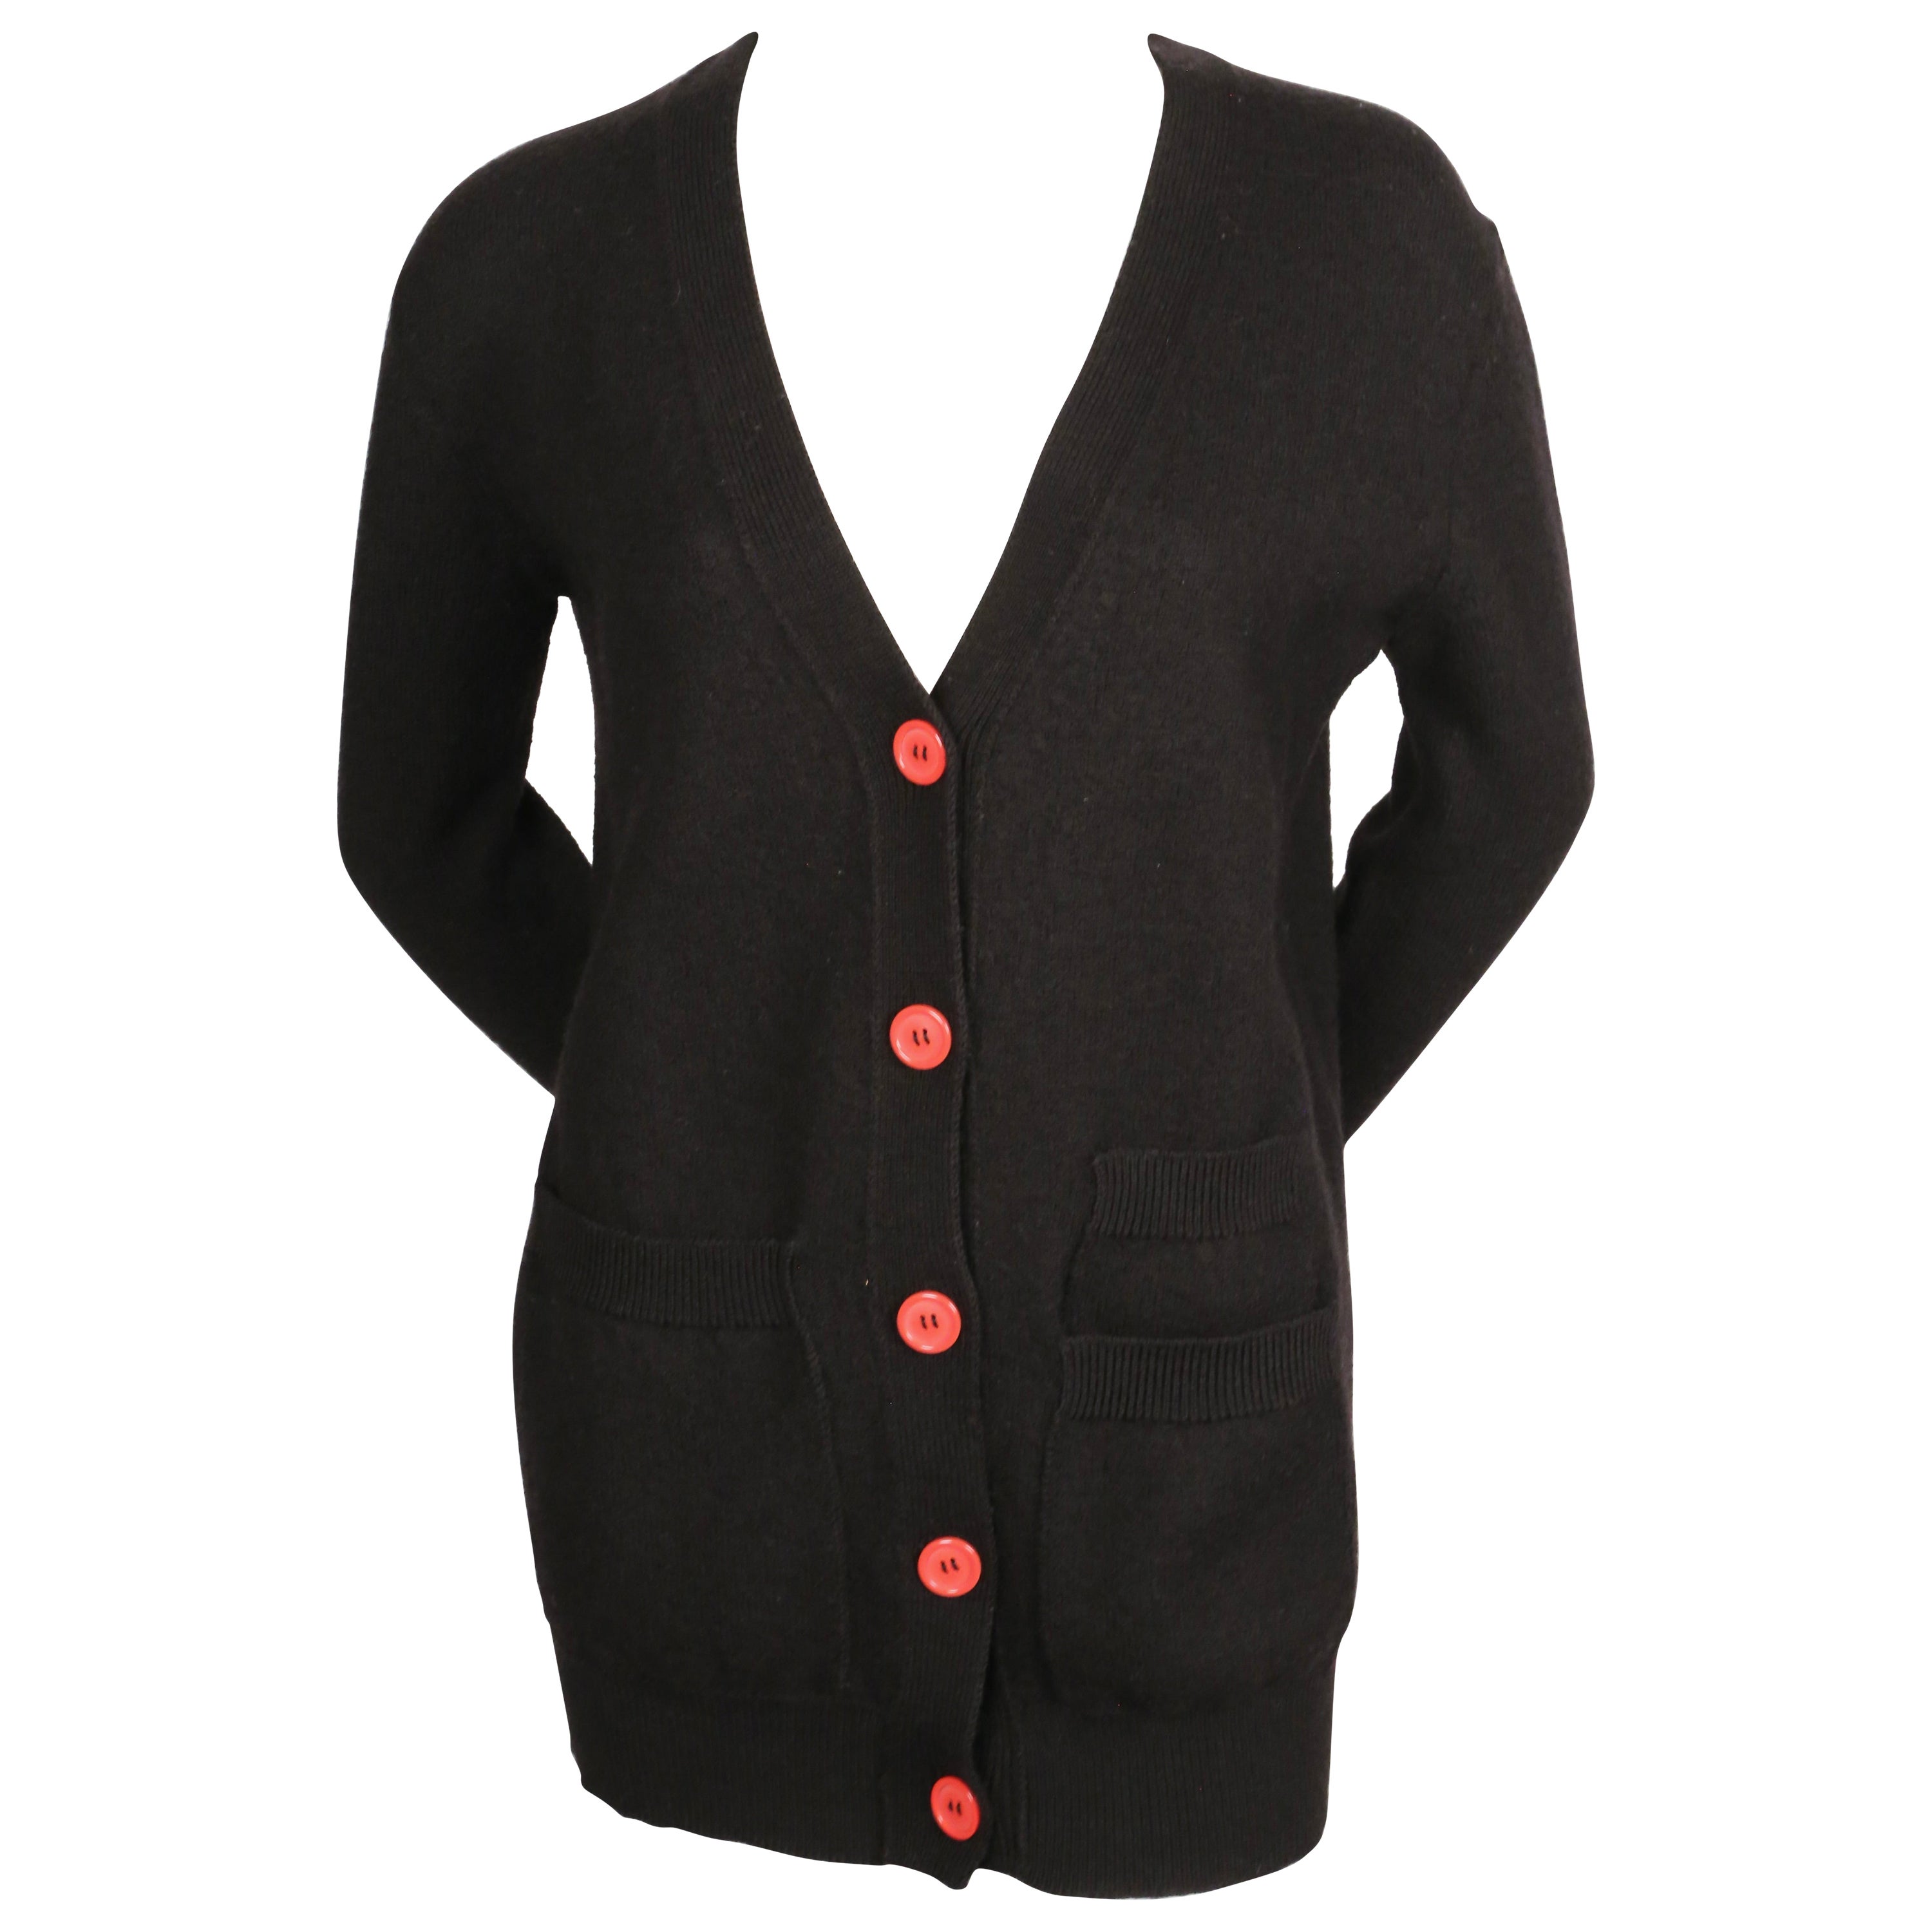 CELINE by PHOEBE PHILO black boucle knit cardigan with red buttons For Sale